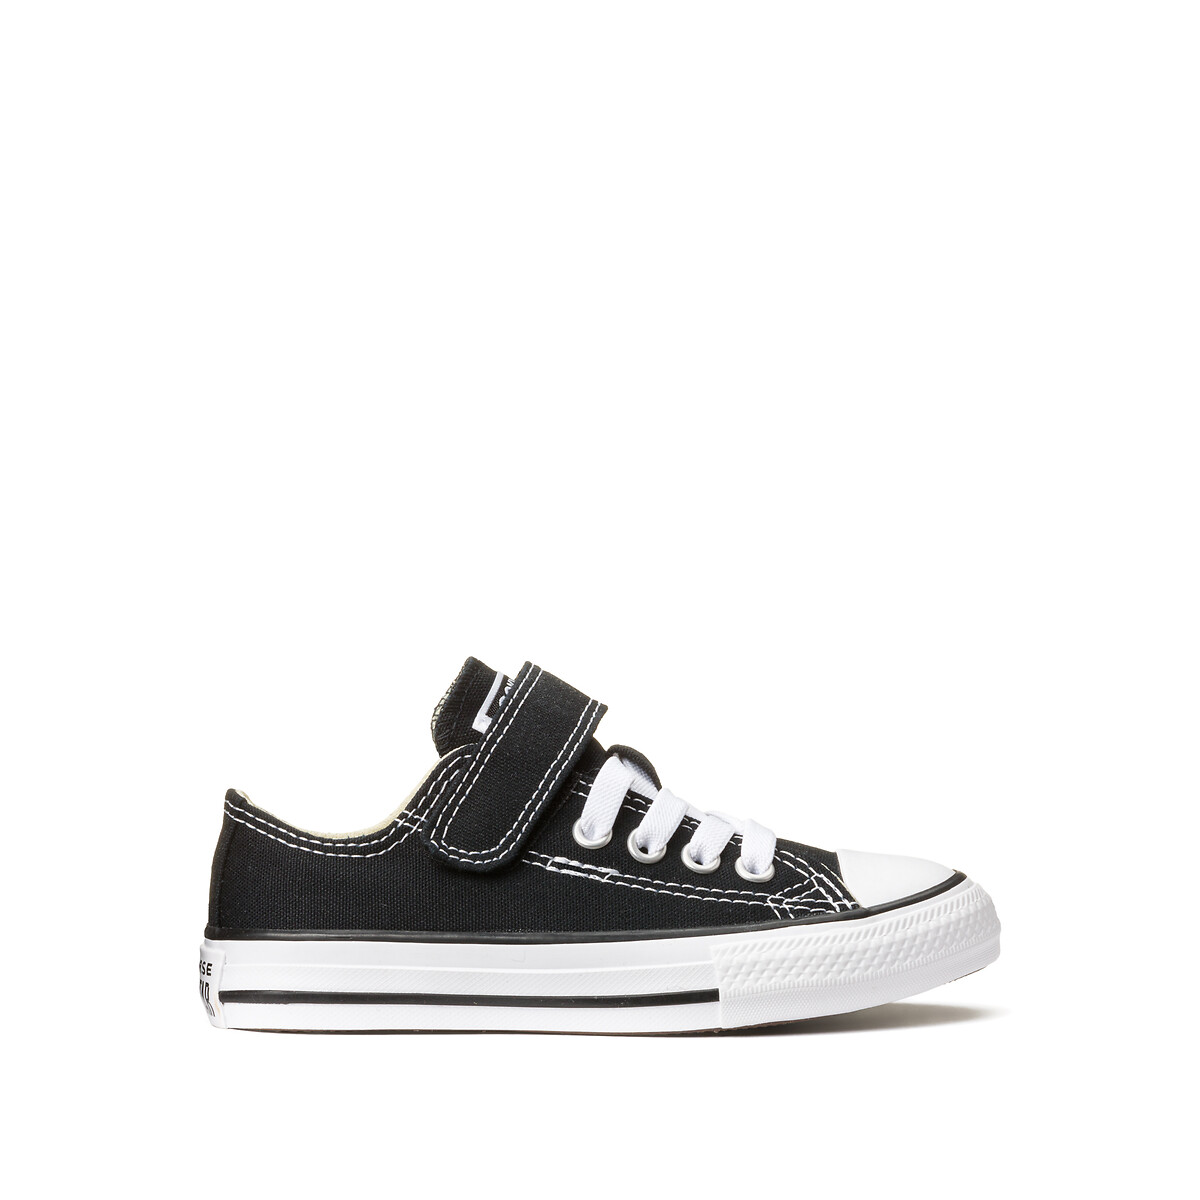 Kids Chuck Taylor All Star 1V Canvas Trainers